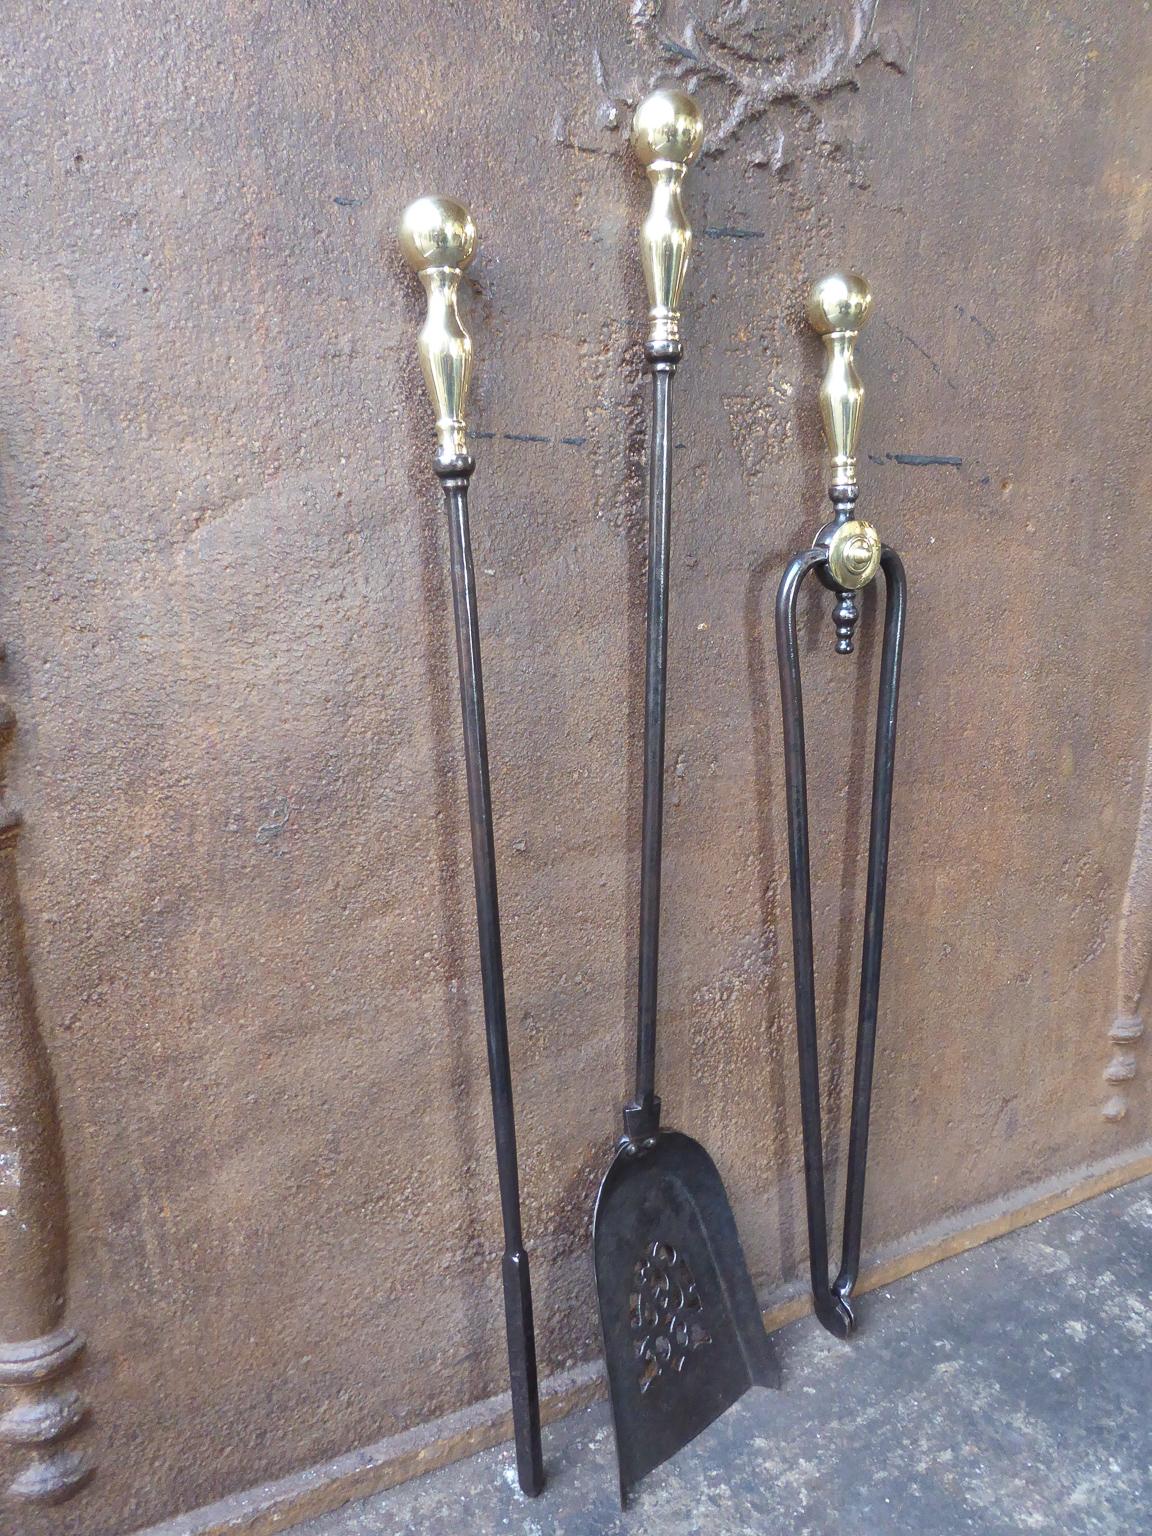 19th century English Victorian fire tool set. The set is made of wrought iron and polished brass. The set is in a good condition and is fully functional.







 